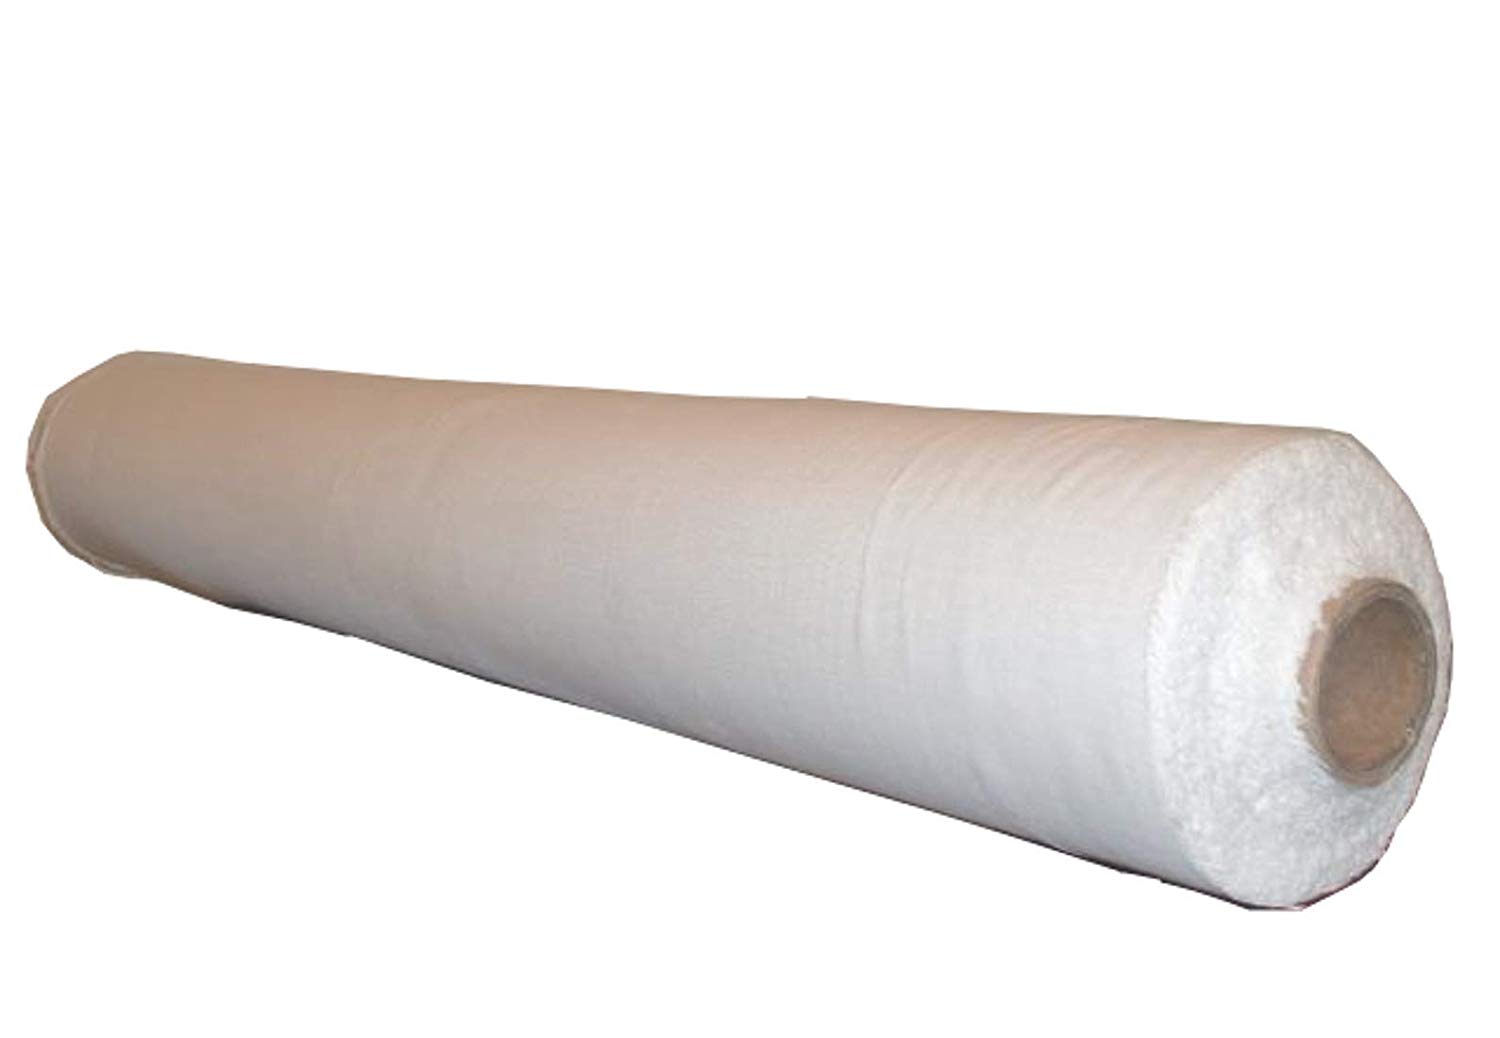 36" Wide Grade 90 Cheesecloth 100 Yard Roll - Bleached